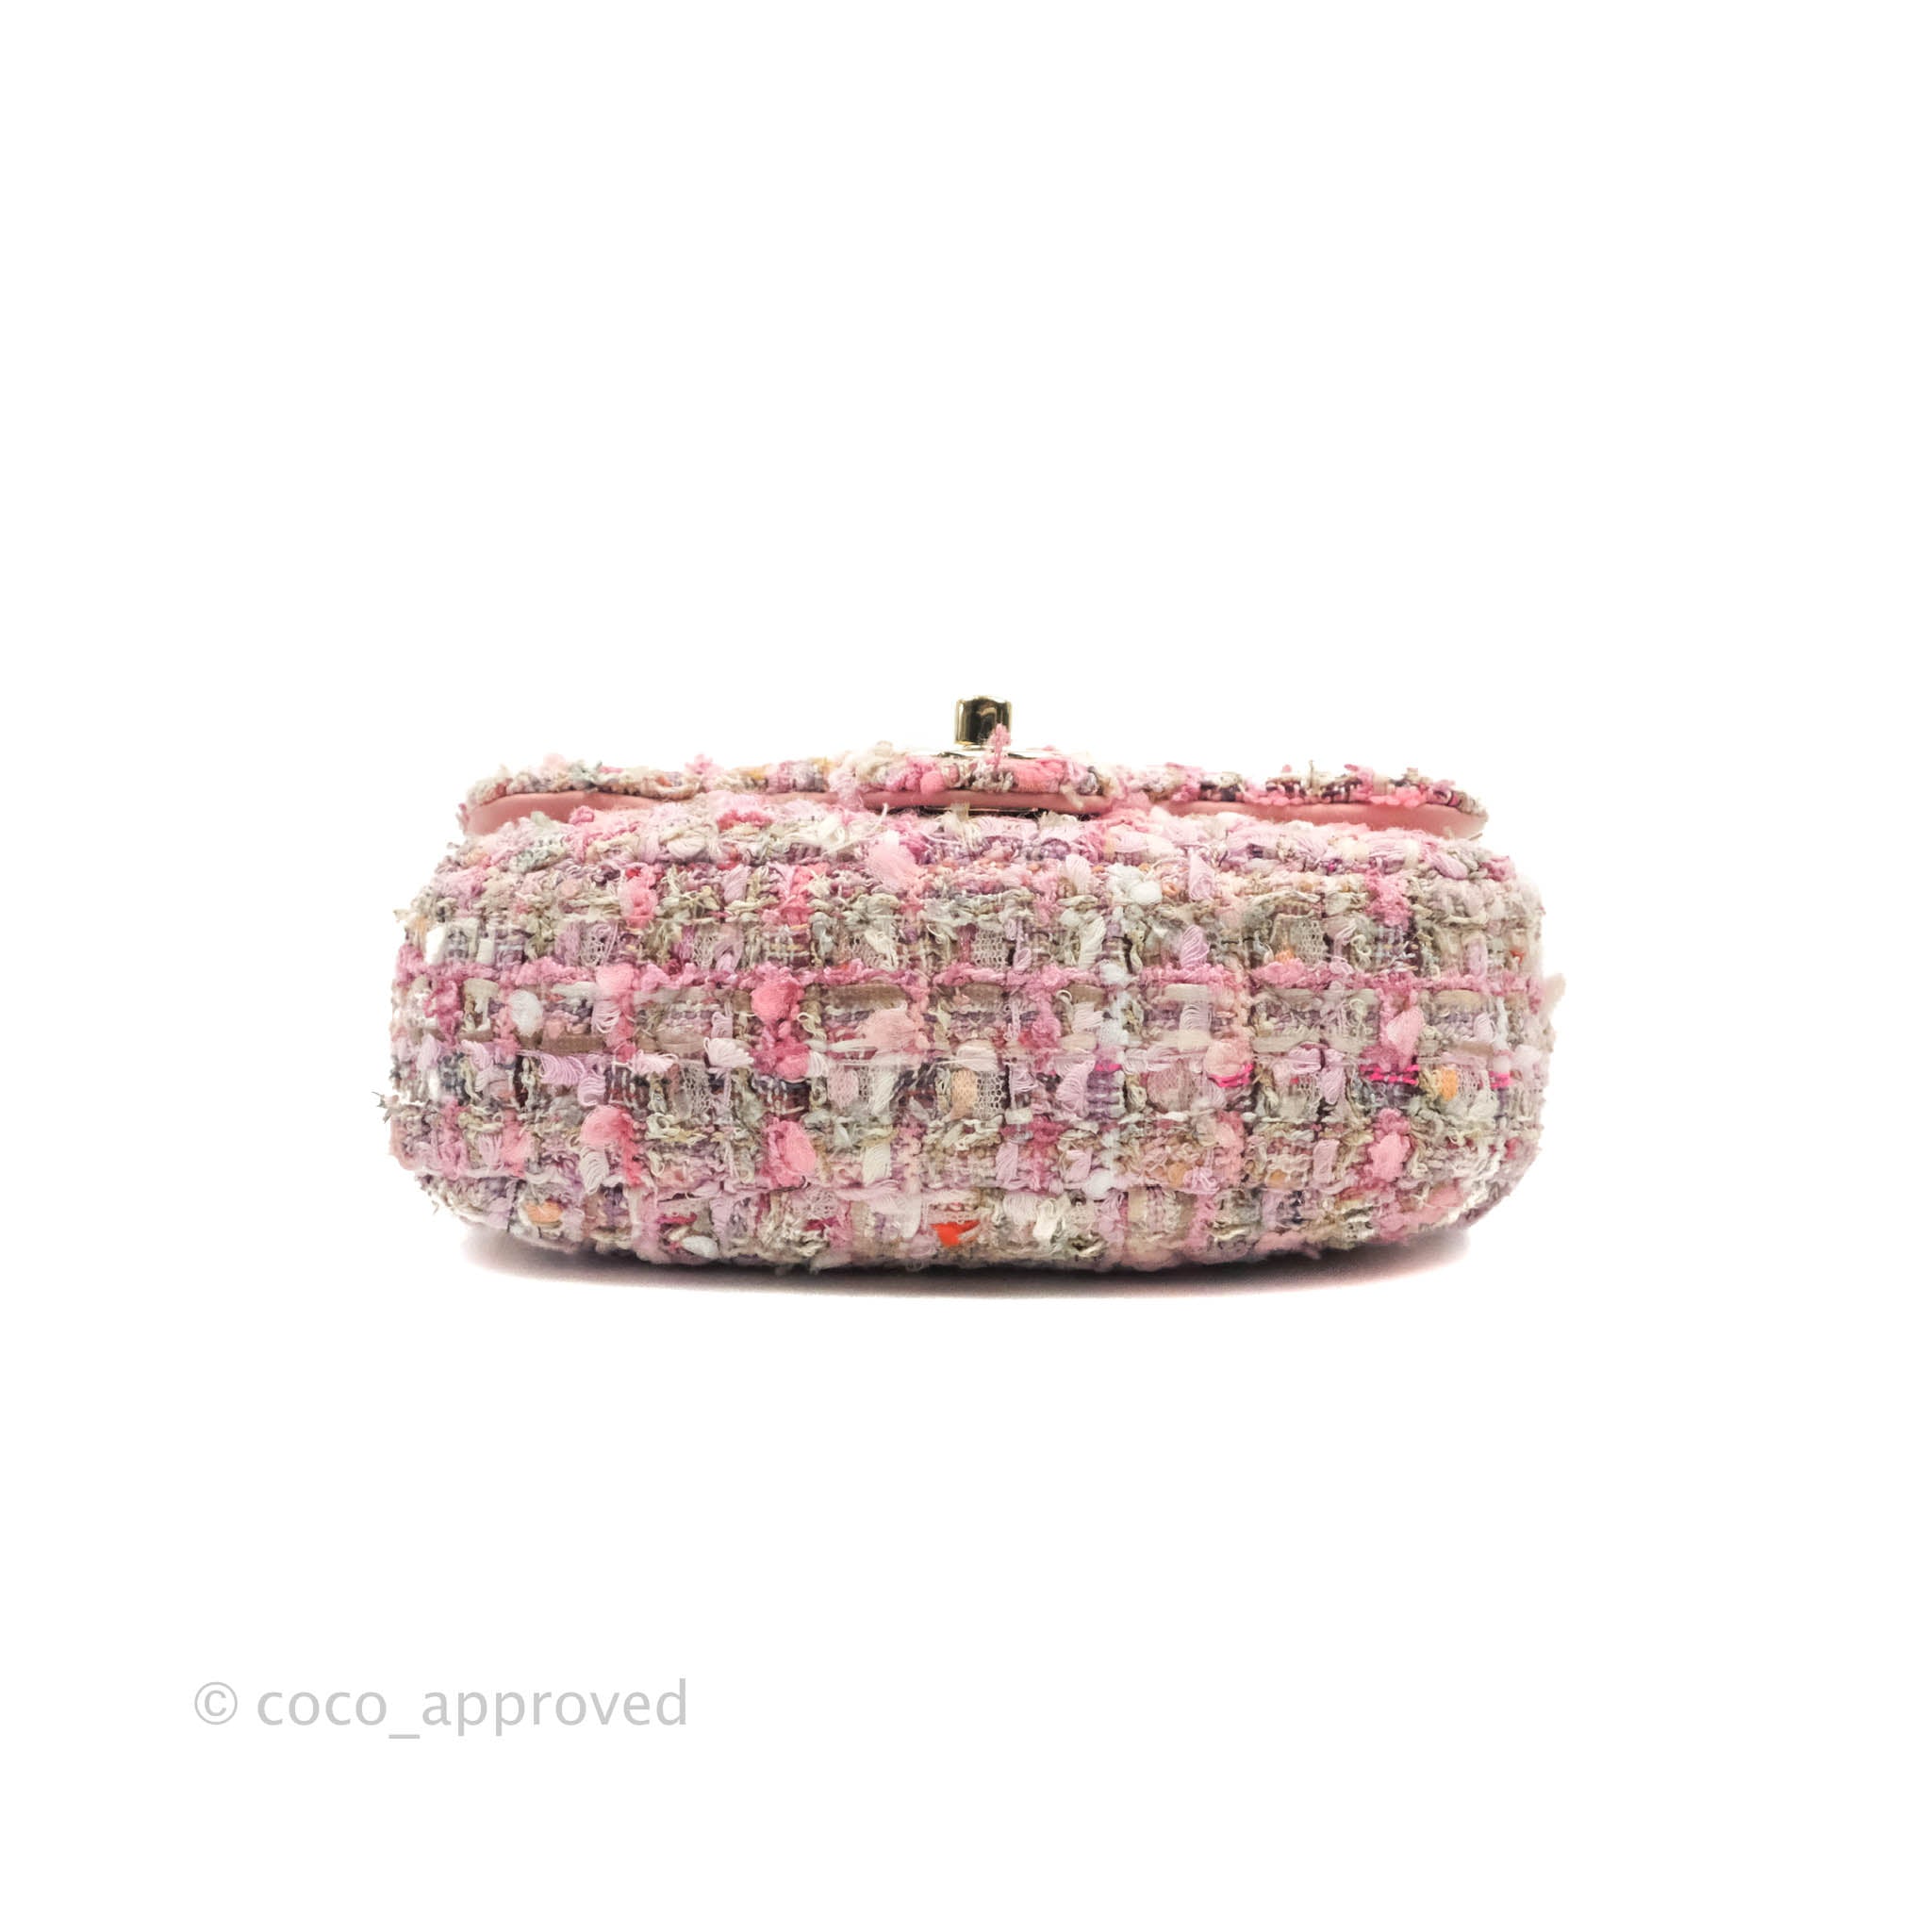 CHANEL, Bags, Oversized Chanel Cottontweed Purse